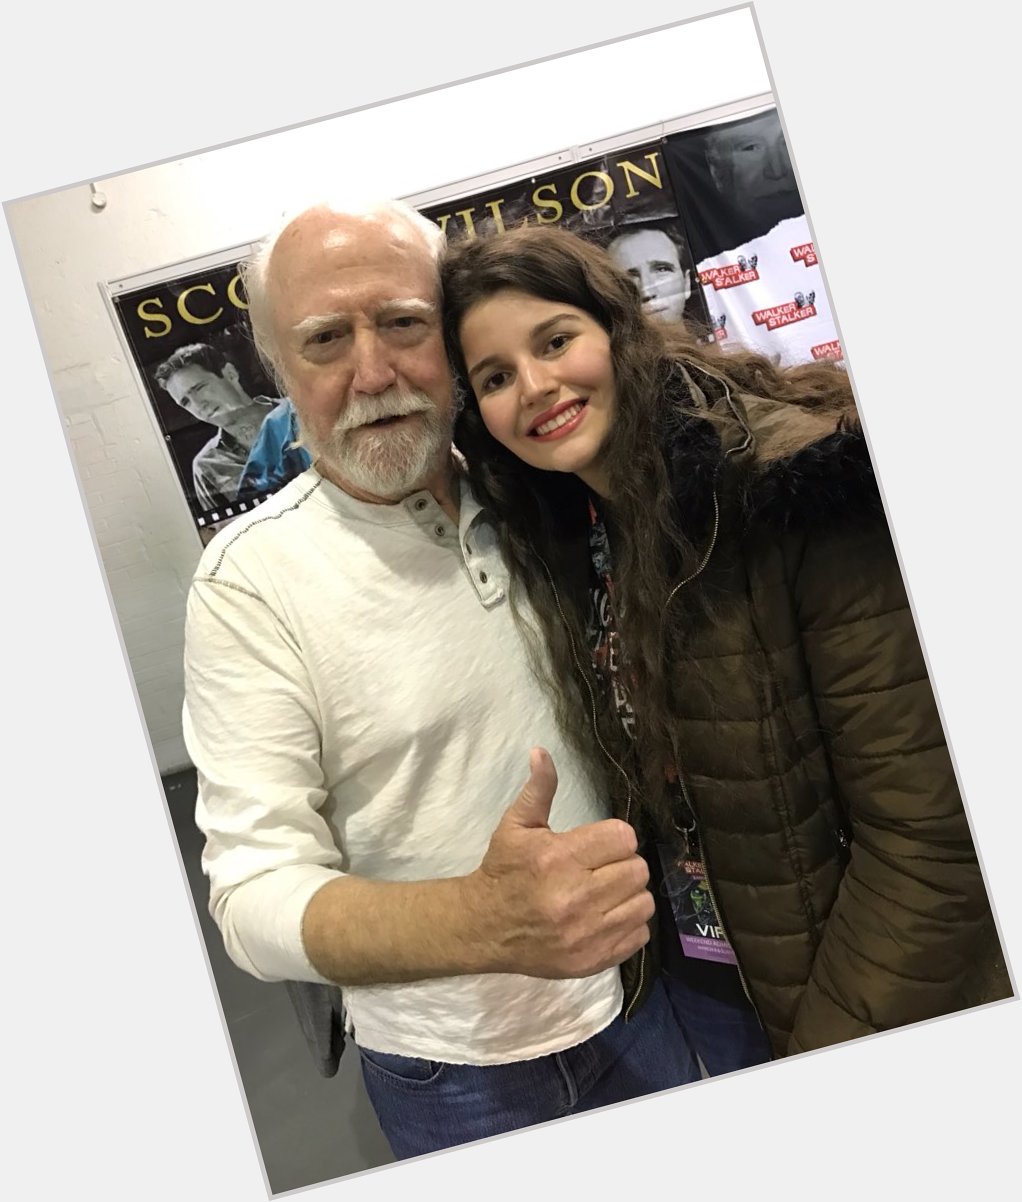 Happy birthday to scott wilson, he\s such an adorable and talented person, I wish him the best x 